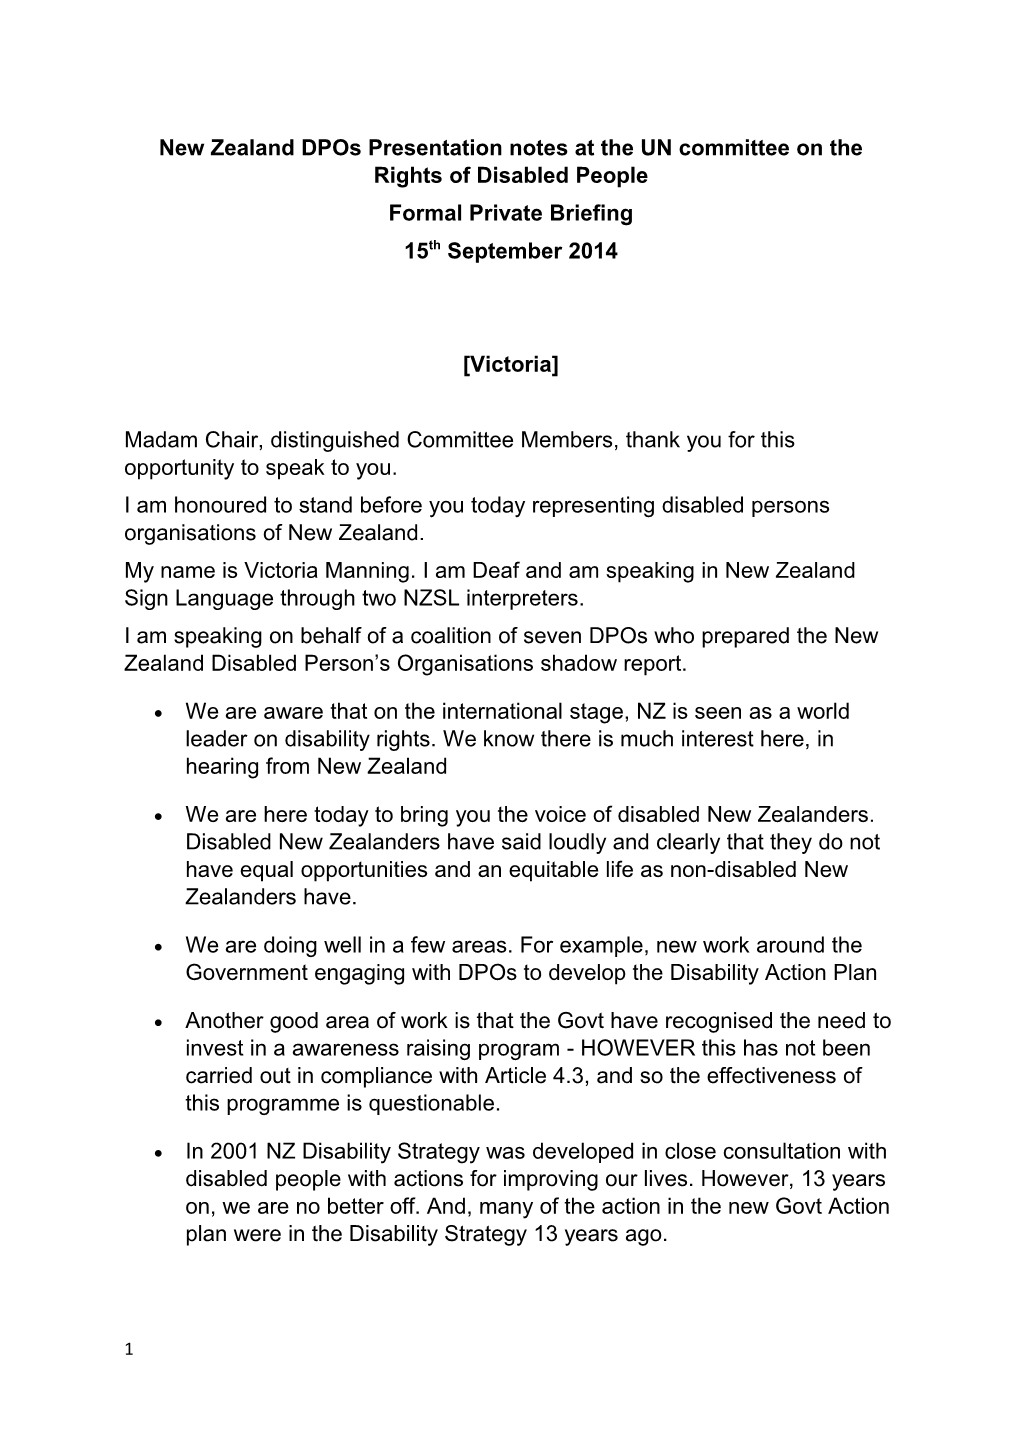 New Zealand Dpos Presentation Notesat the UN Committee on the Rights of Disabled People